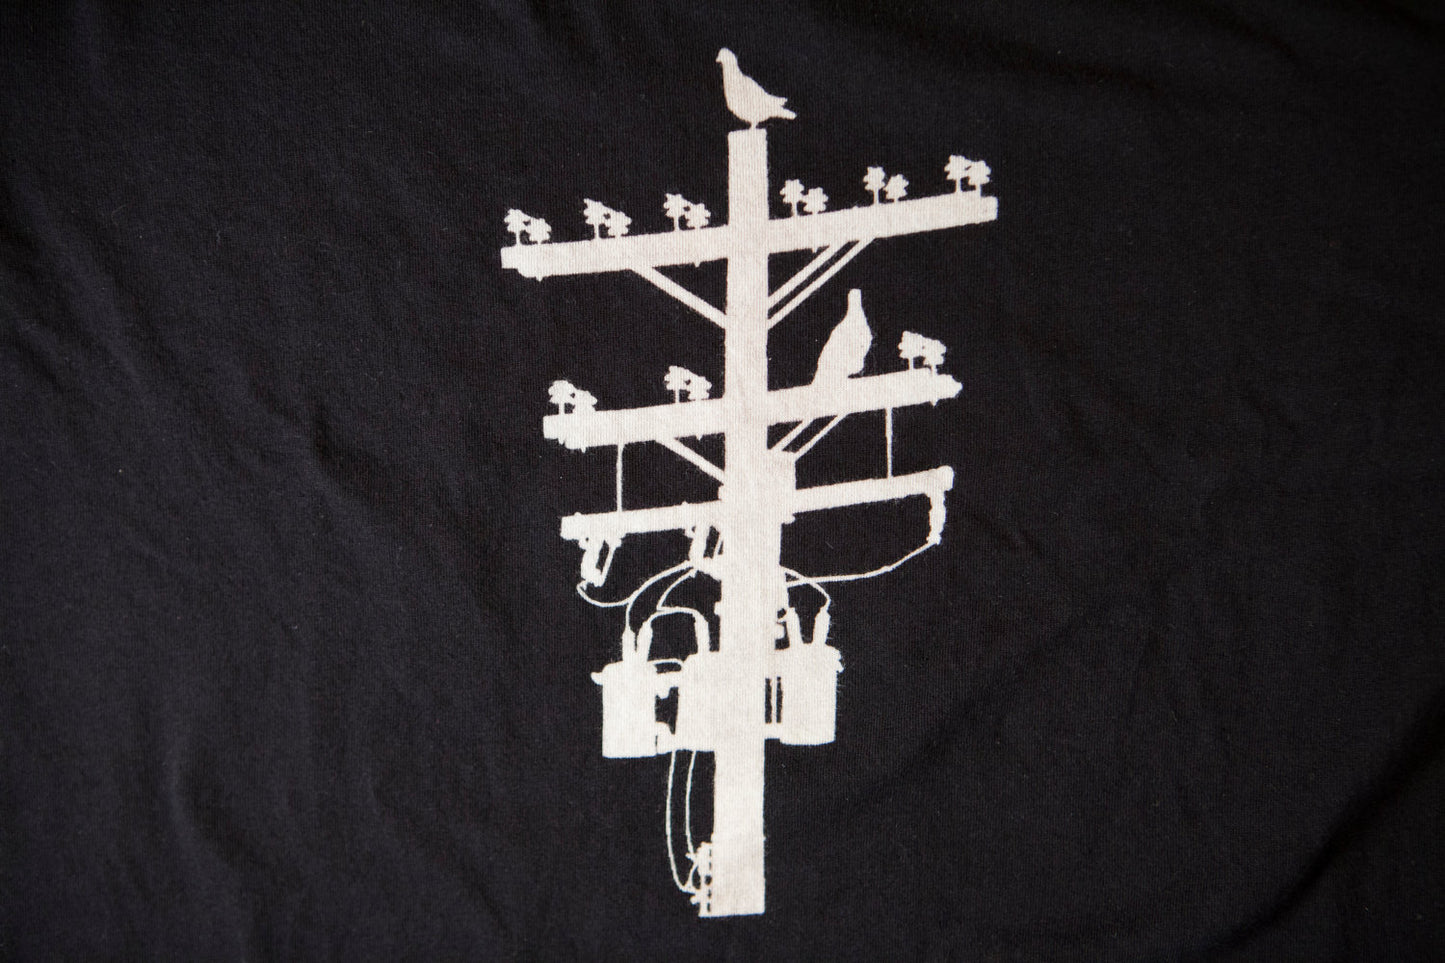 Black and White Pigeon Tree Logo Tee Made in USA T-shirt